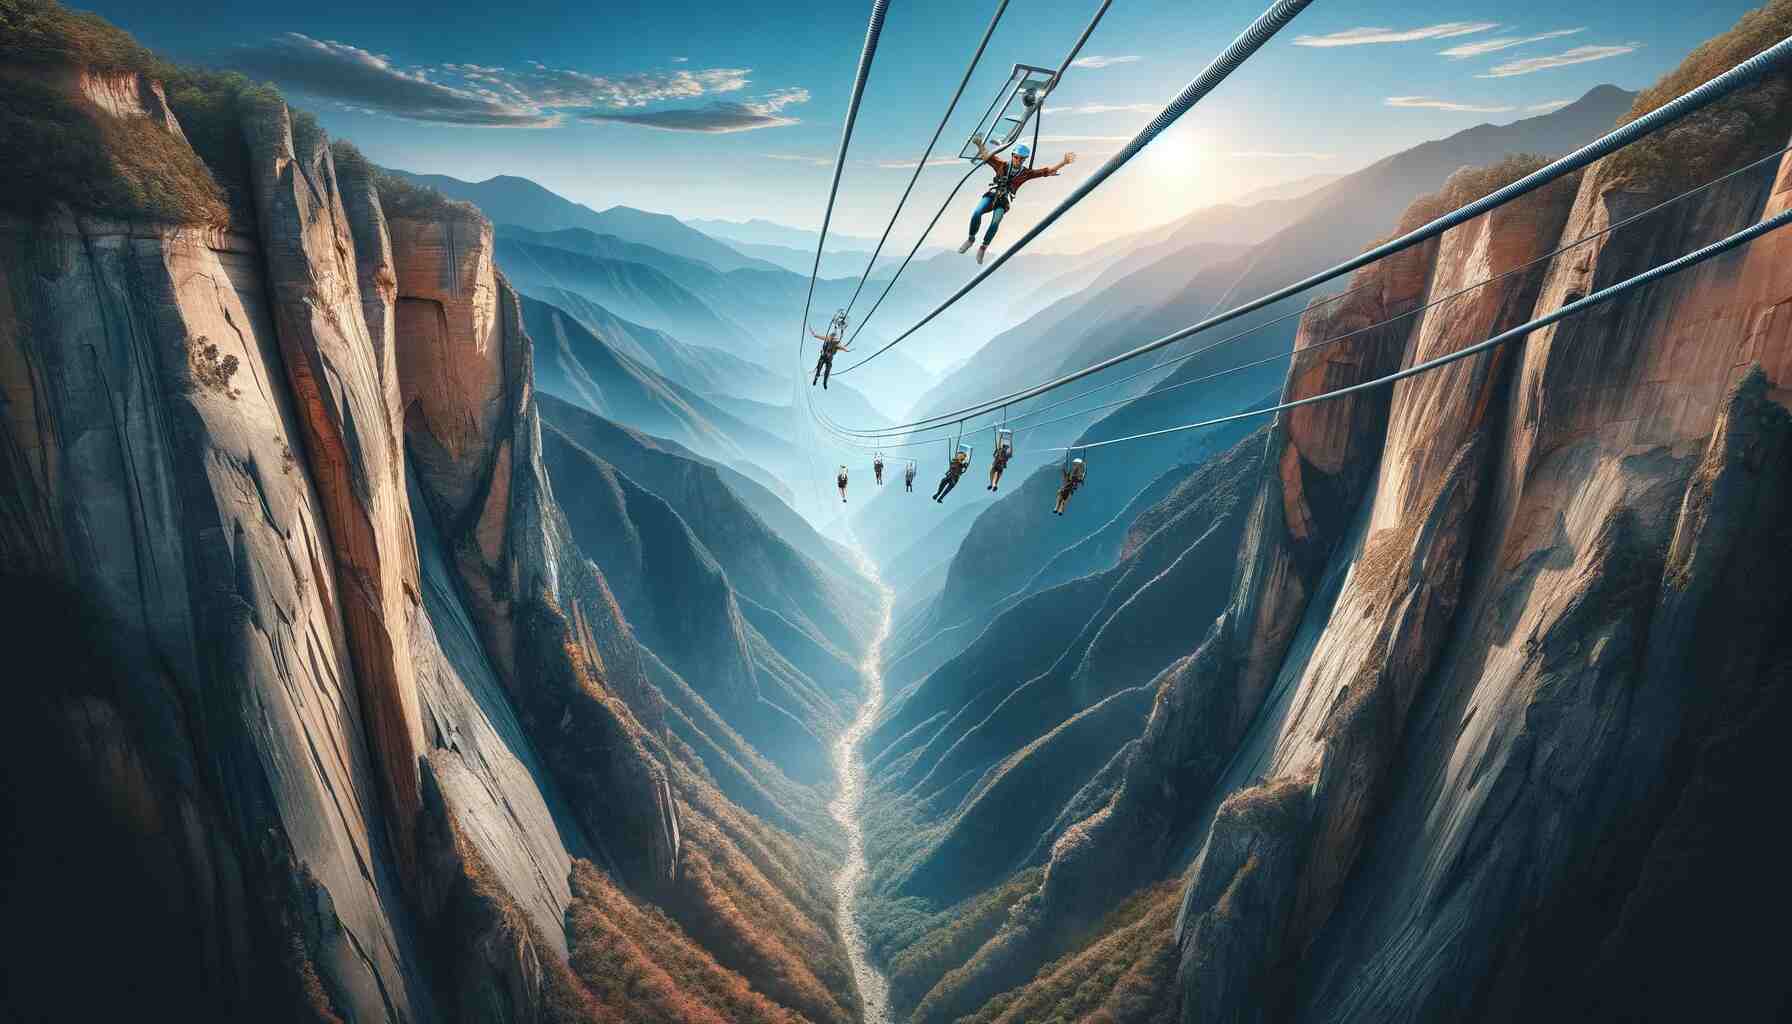 Here's the feature image for "The Most Extreme Zipline in the US," showcasing a breathtaking scene of adventure and natural beauty.